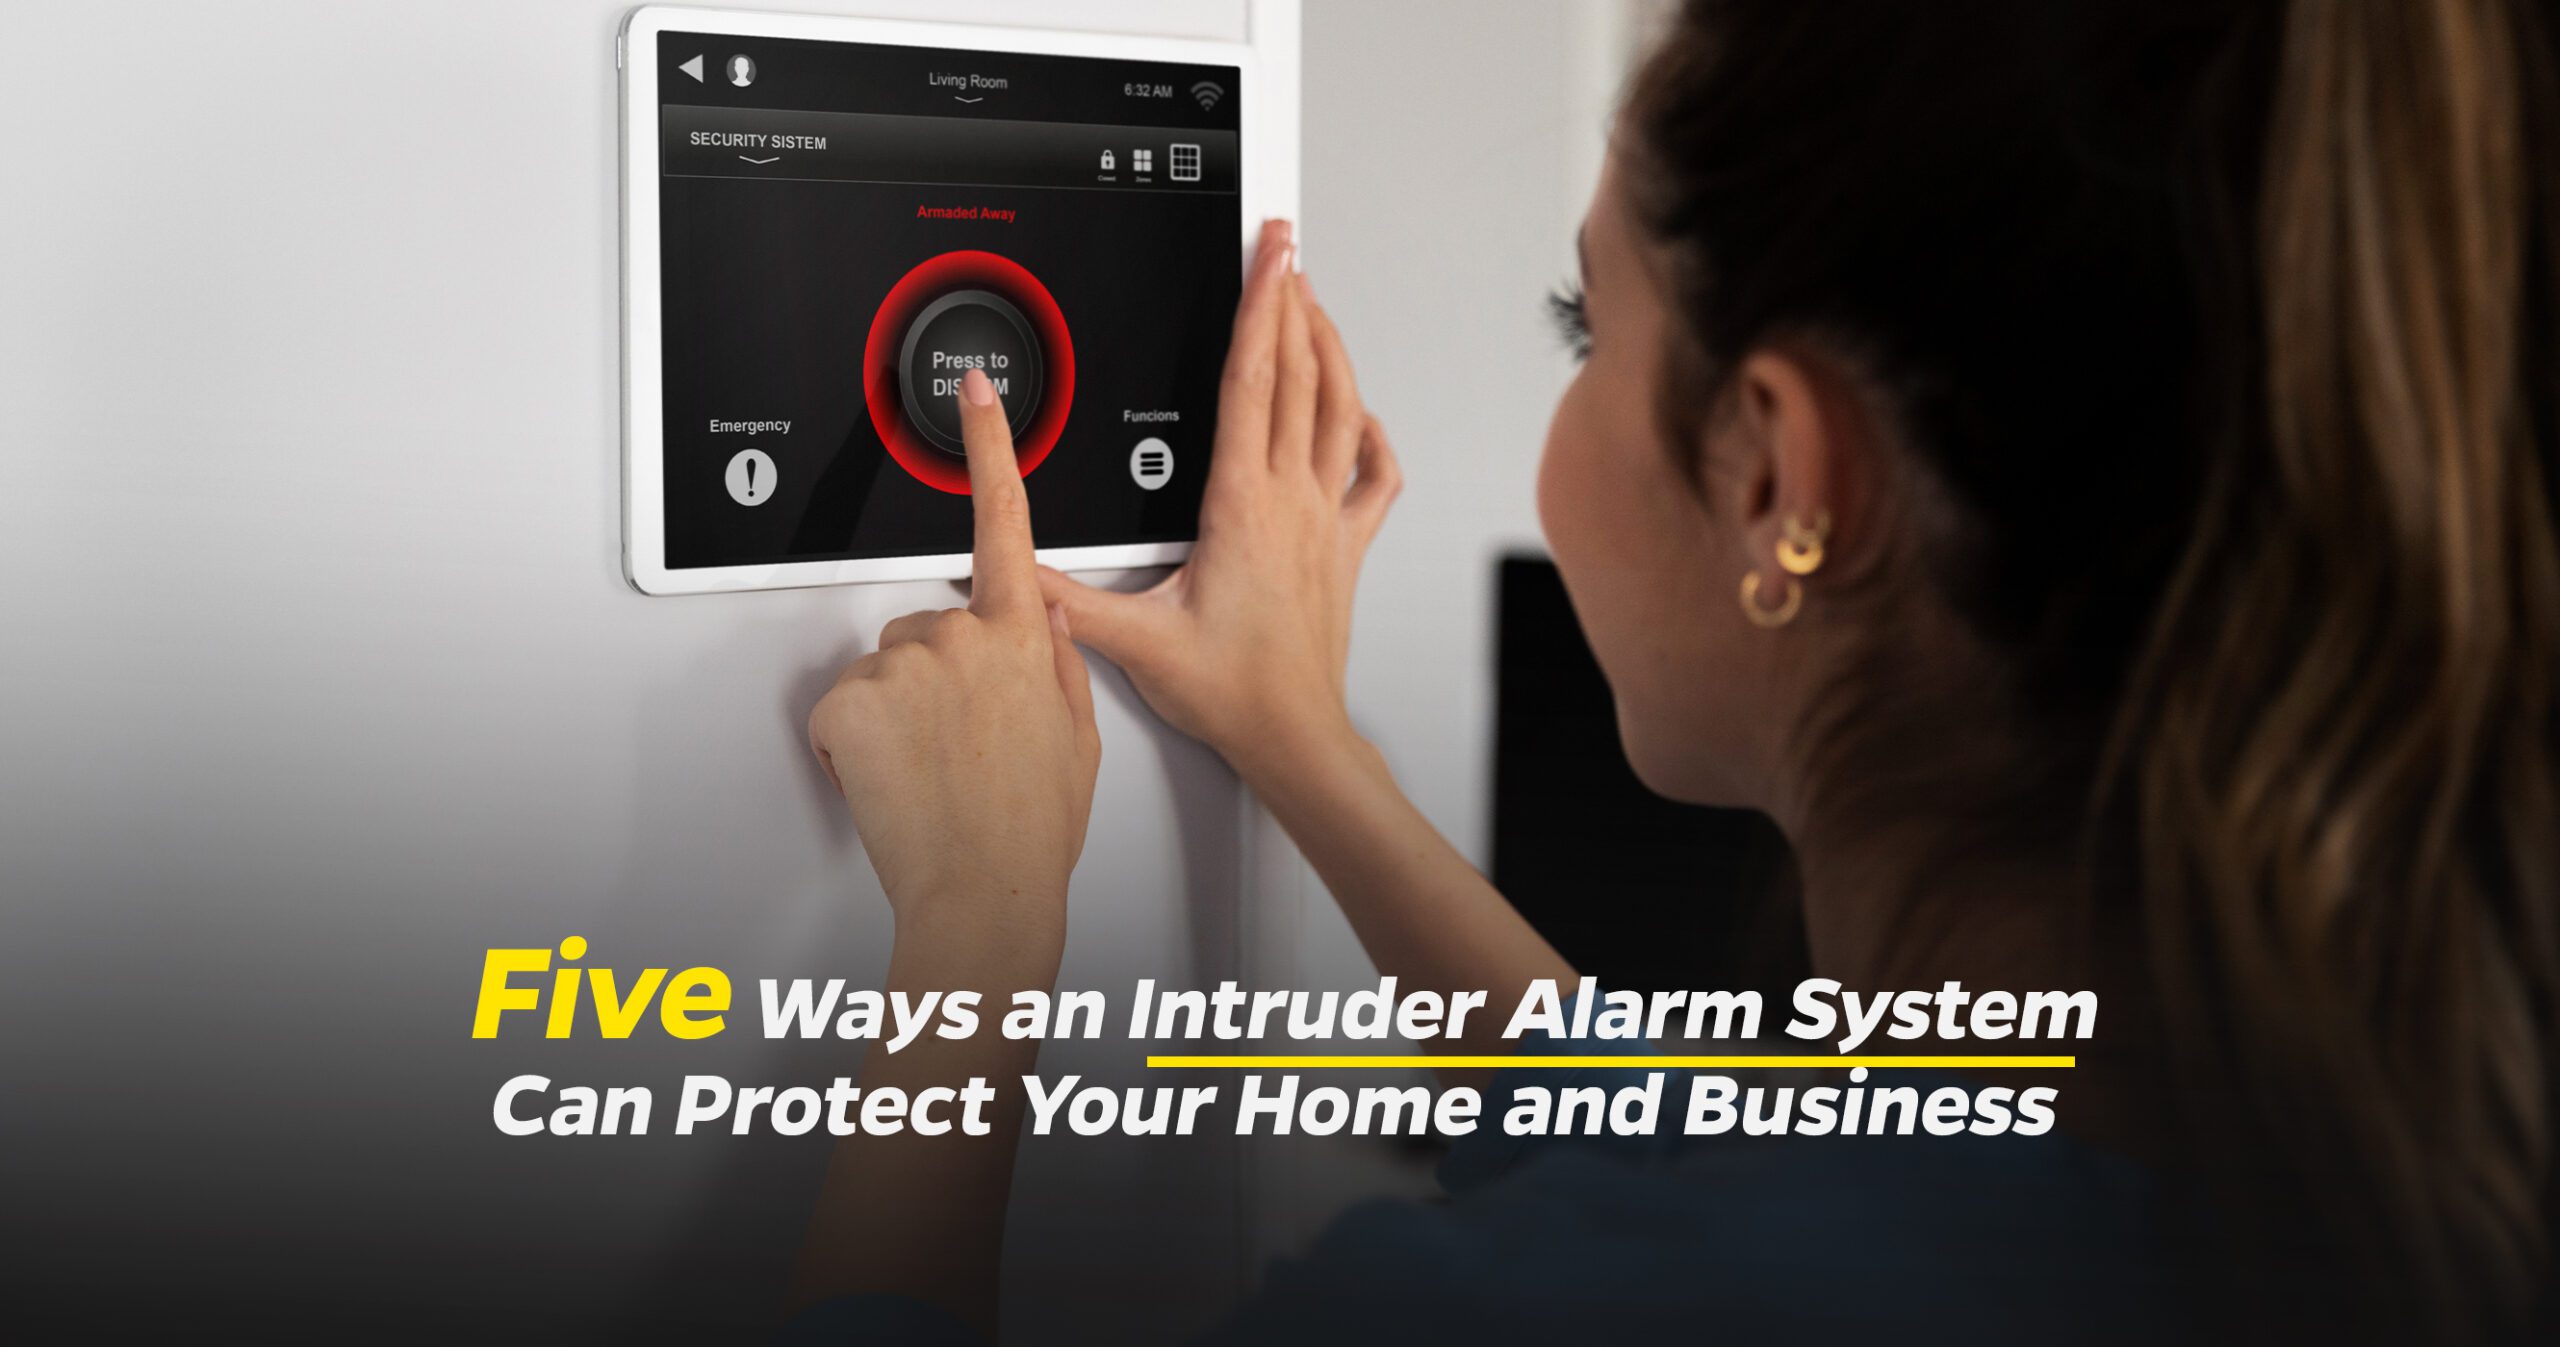 Featured image for “Five Ways an Intruder Alarm System Can Protect Your Home and Business”